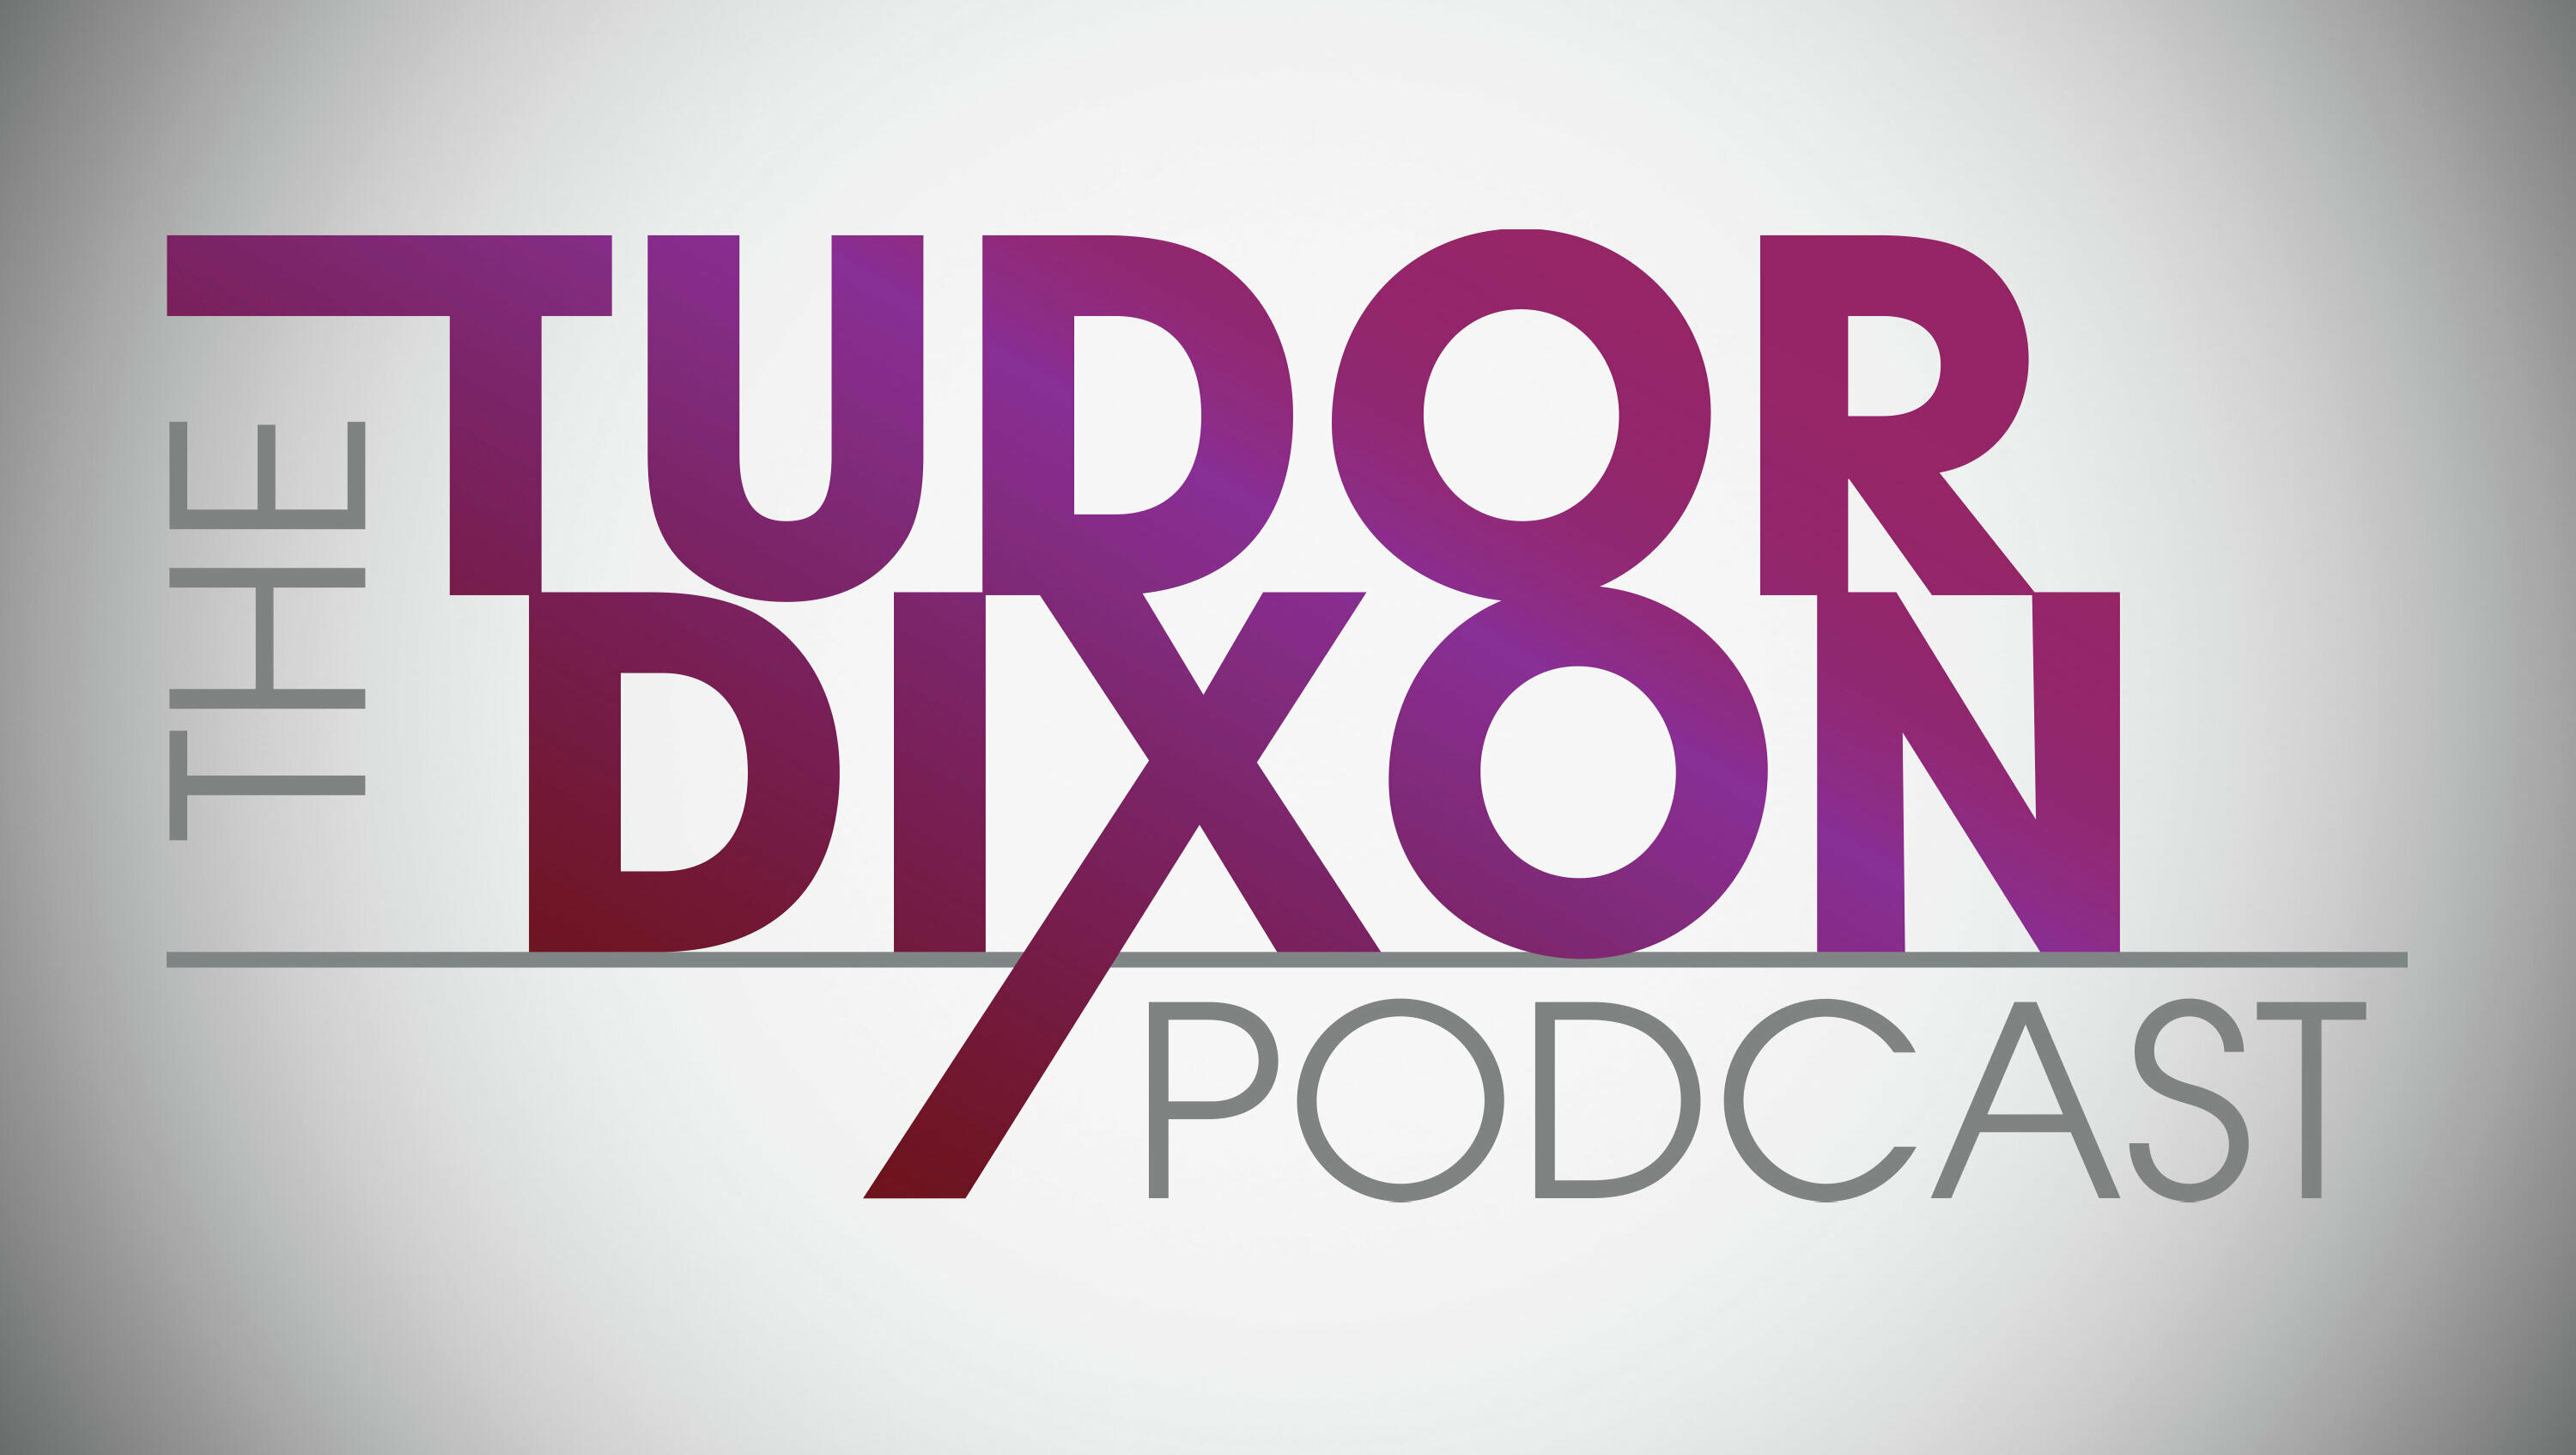 The Tudor Dixon Podcast: Jocelyn Benson: The Face of Election Interference